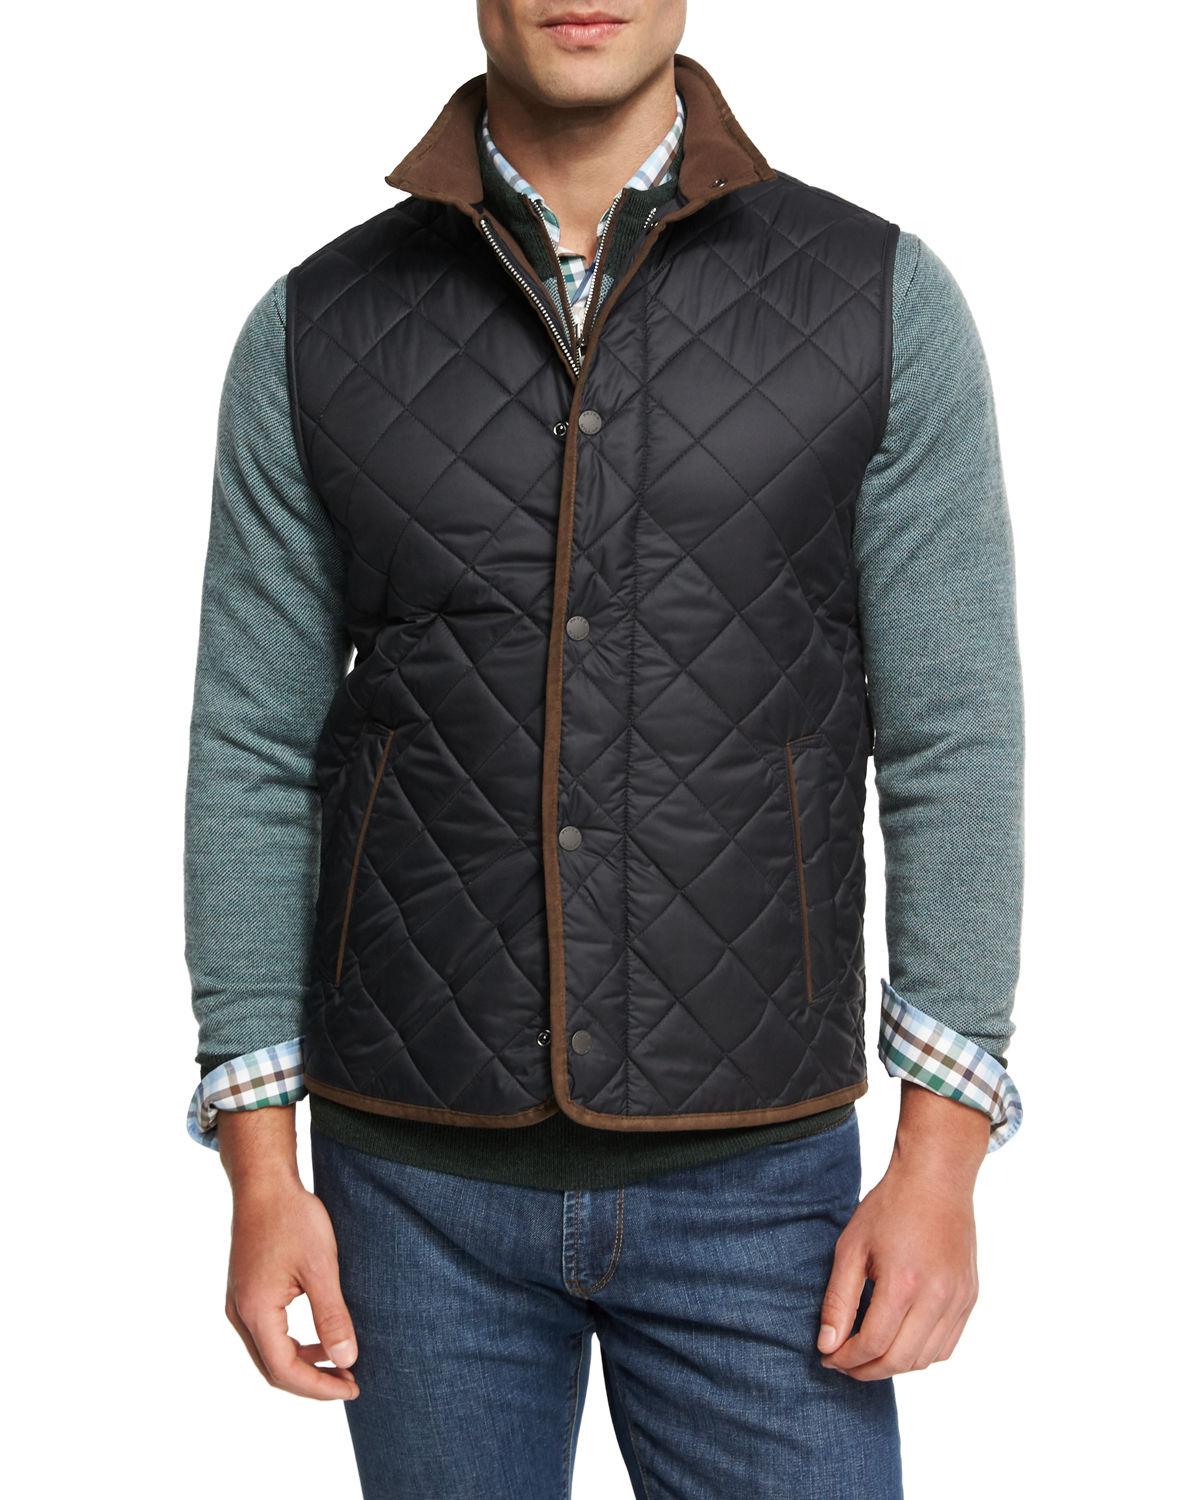 Peter Millar Synthetic Essex Quilted Vest in Black for Men - Lyst